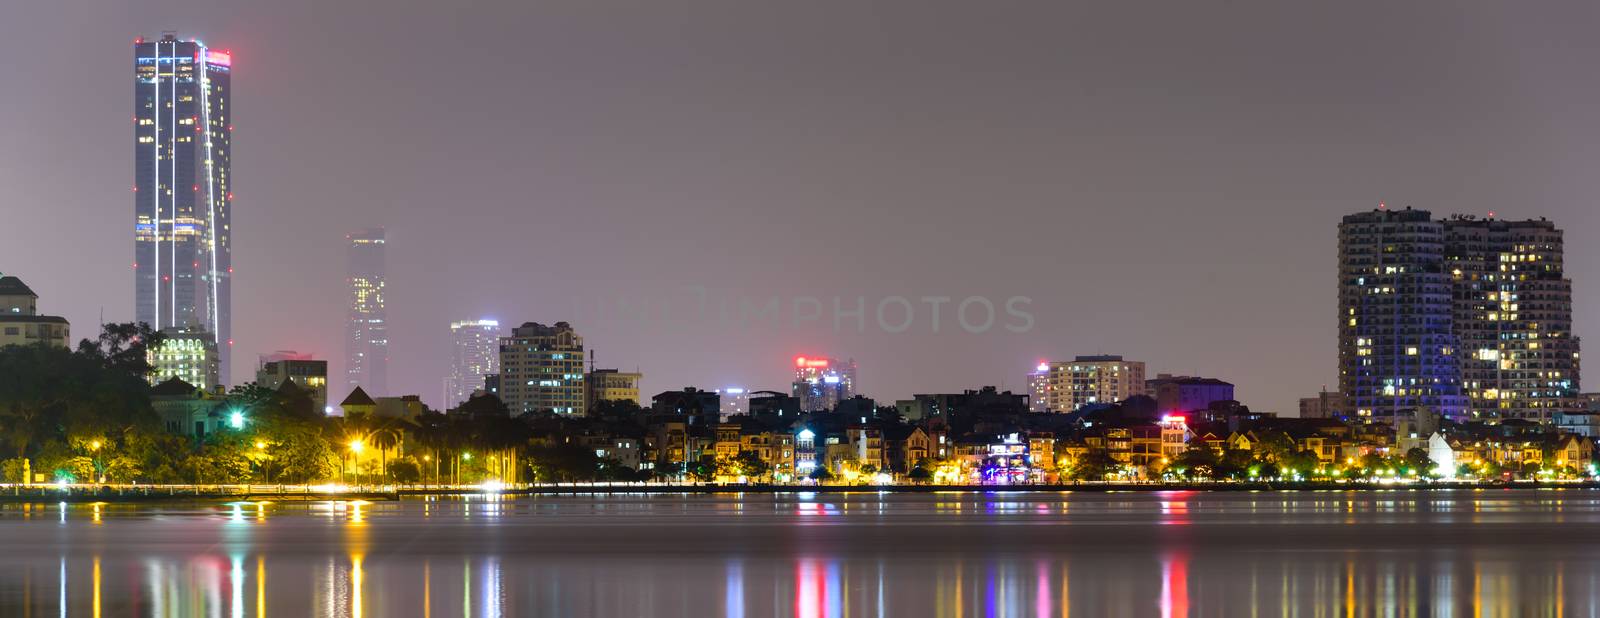 Panoramic colorful skyline reflection of downtown Hanoi skyscrapers from West Lake by trongnguyen